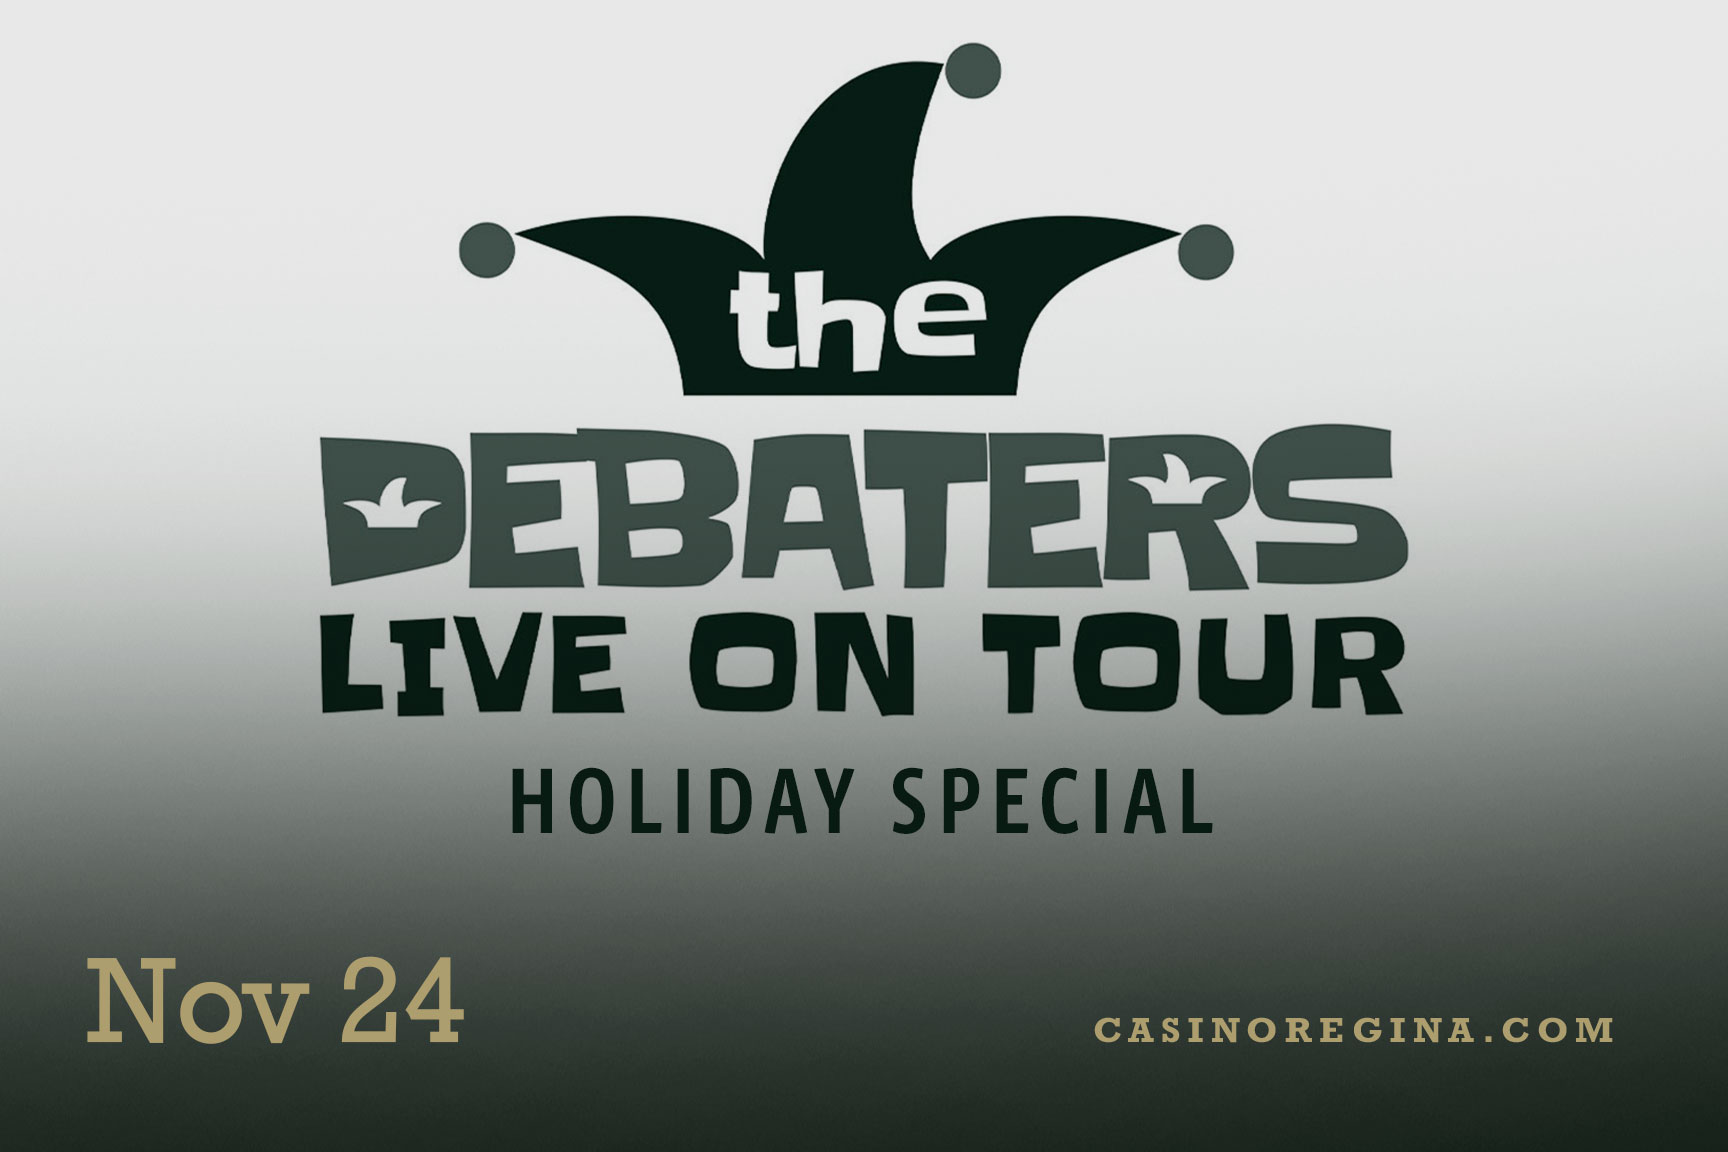 The Debaters Live on Tour Holiday Special!